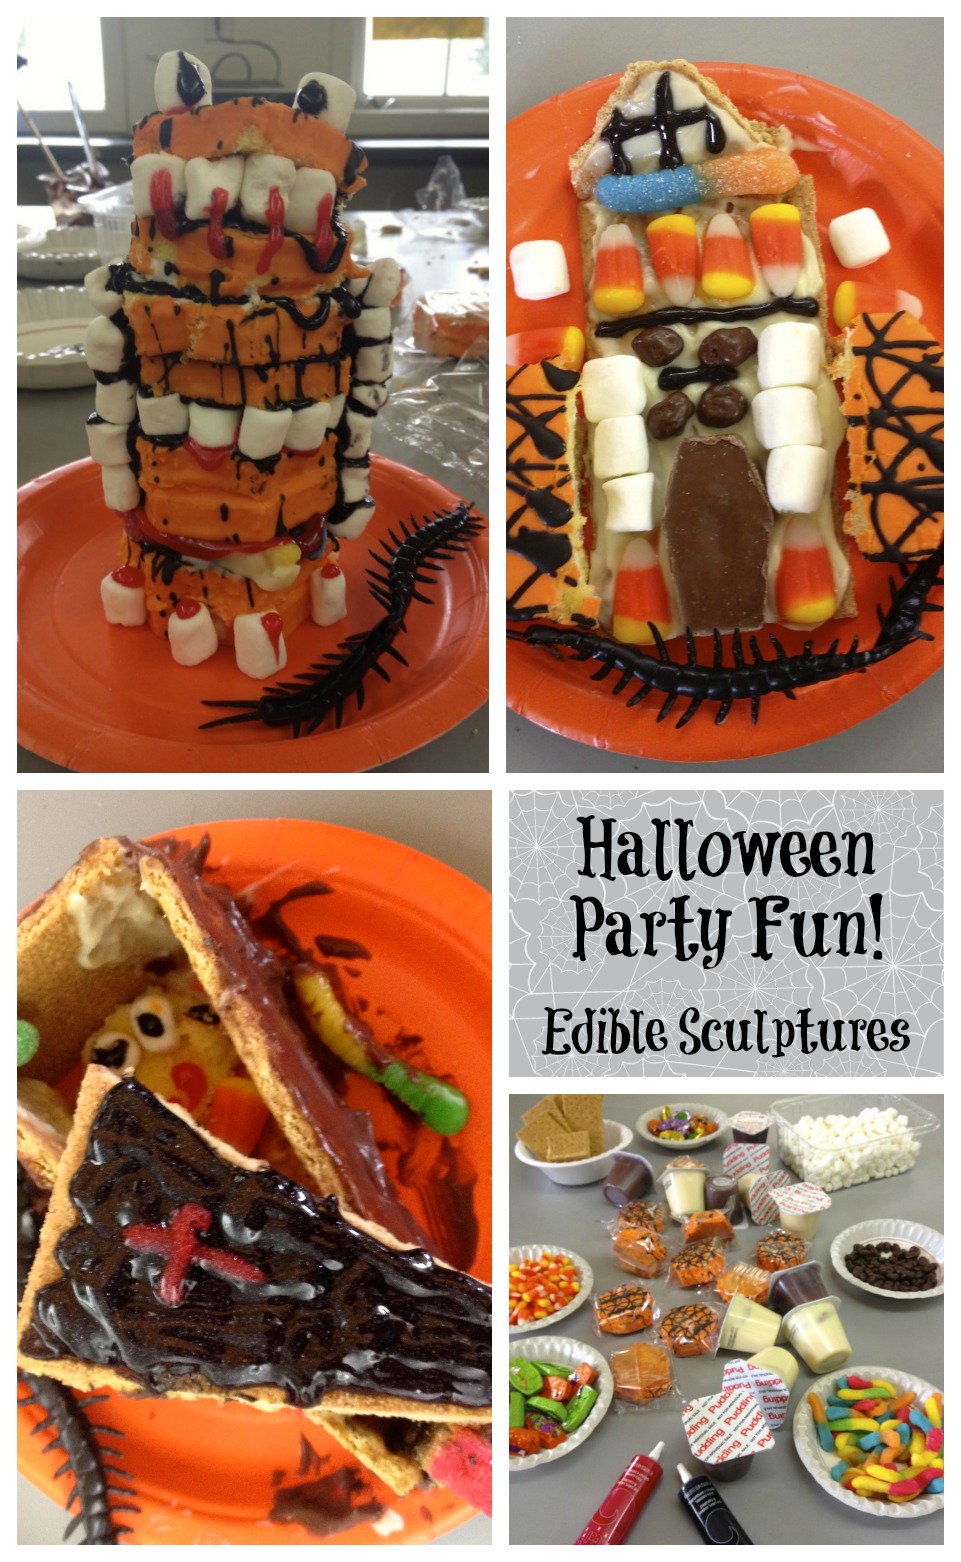 Halloween Party Fun with Edible Scuptures